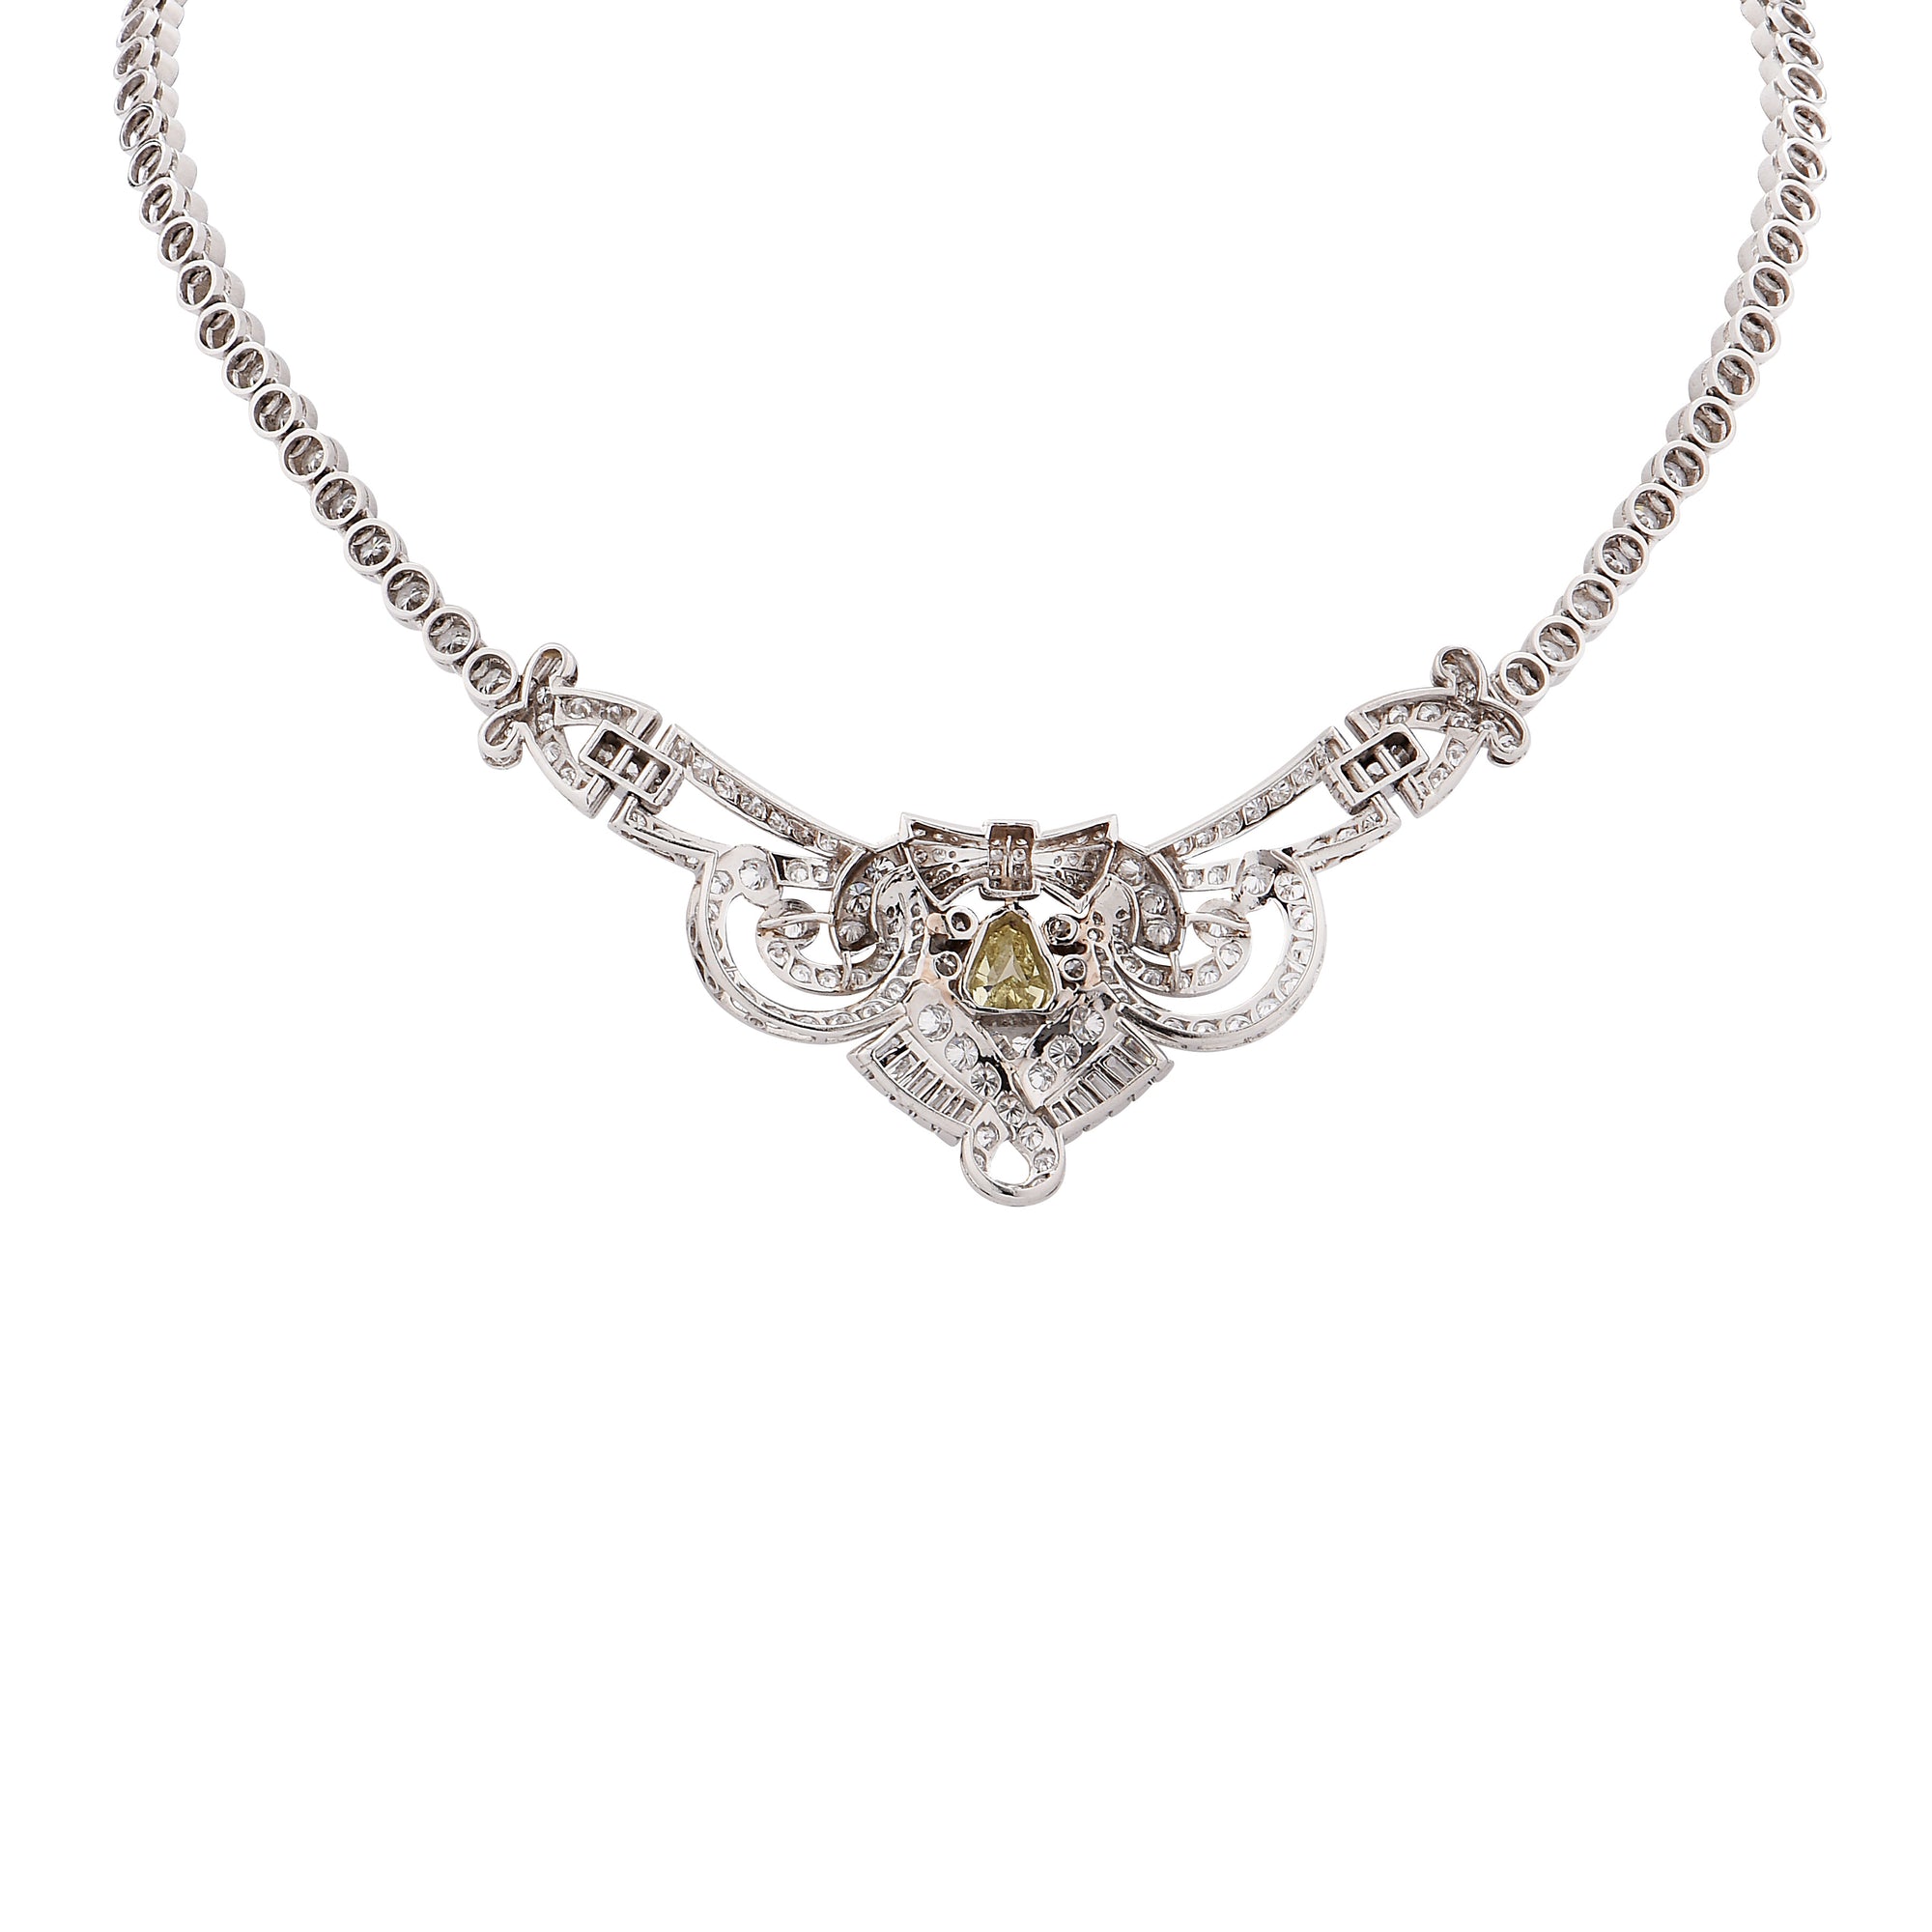 18K Gold Filled Tennis Chain Pearl Choker With Pendant With White Cubic  Zircon And CZ Diamond Gemstones Perfect For Hip Hop Fashion, Parties,  Weddings, And Gifts For Women From Jackchina2014, $10 |